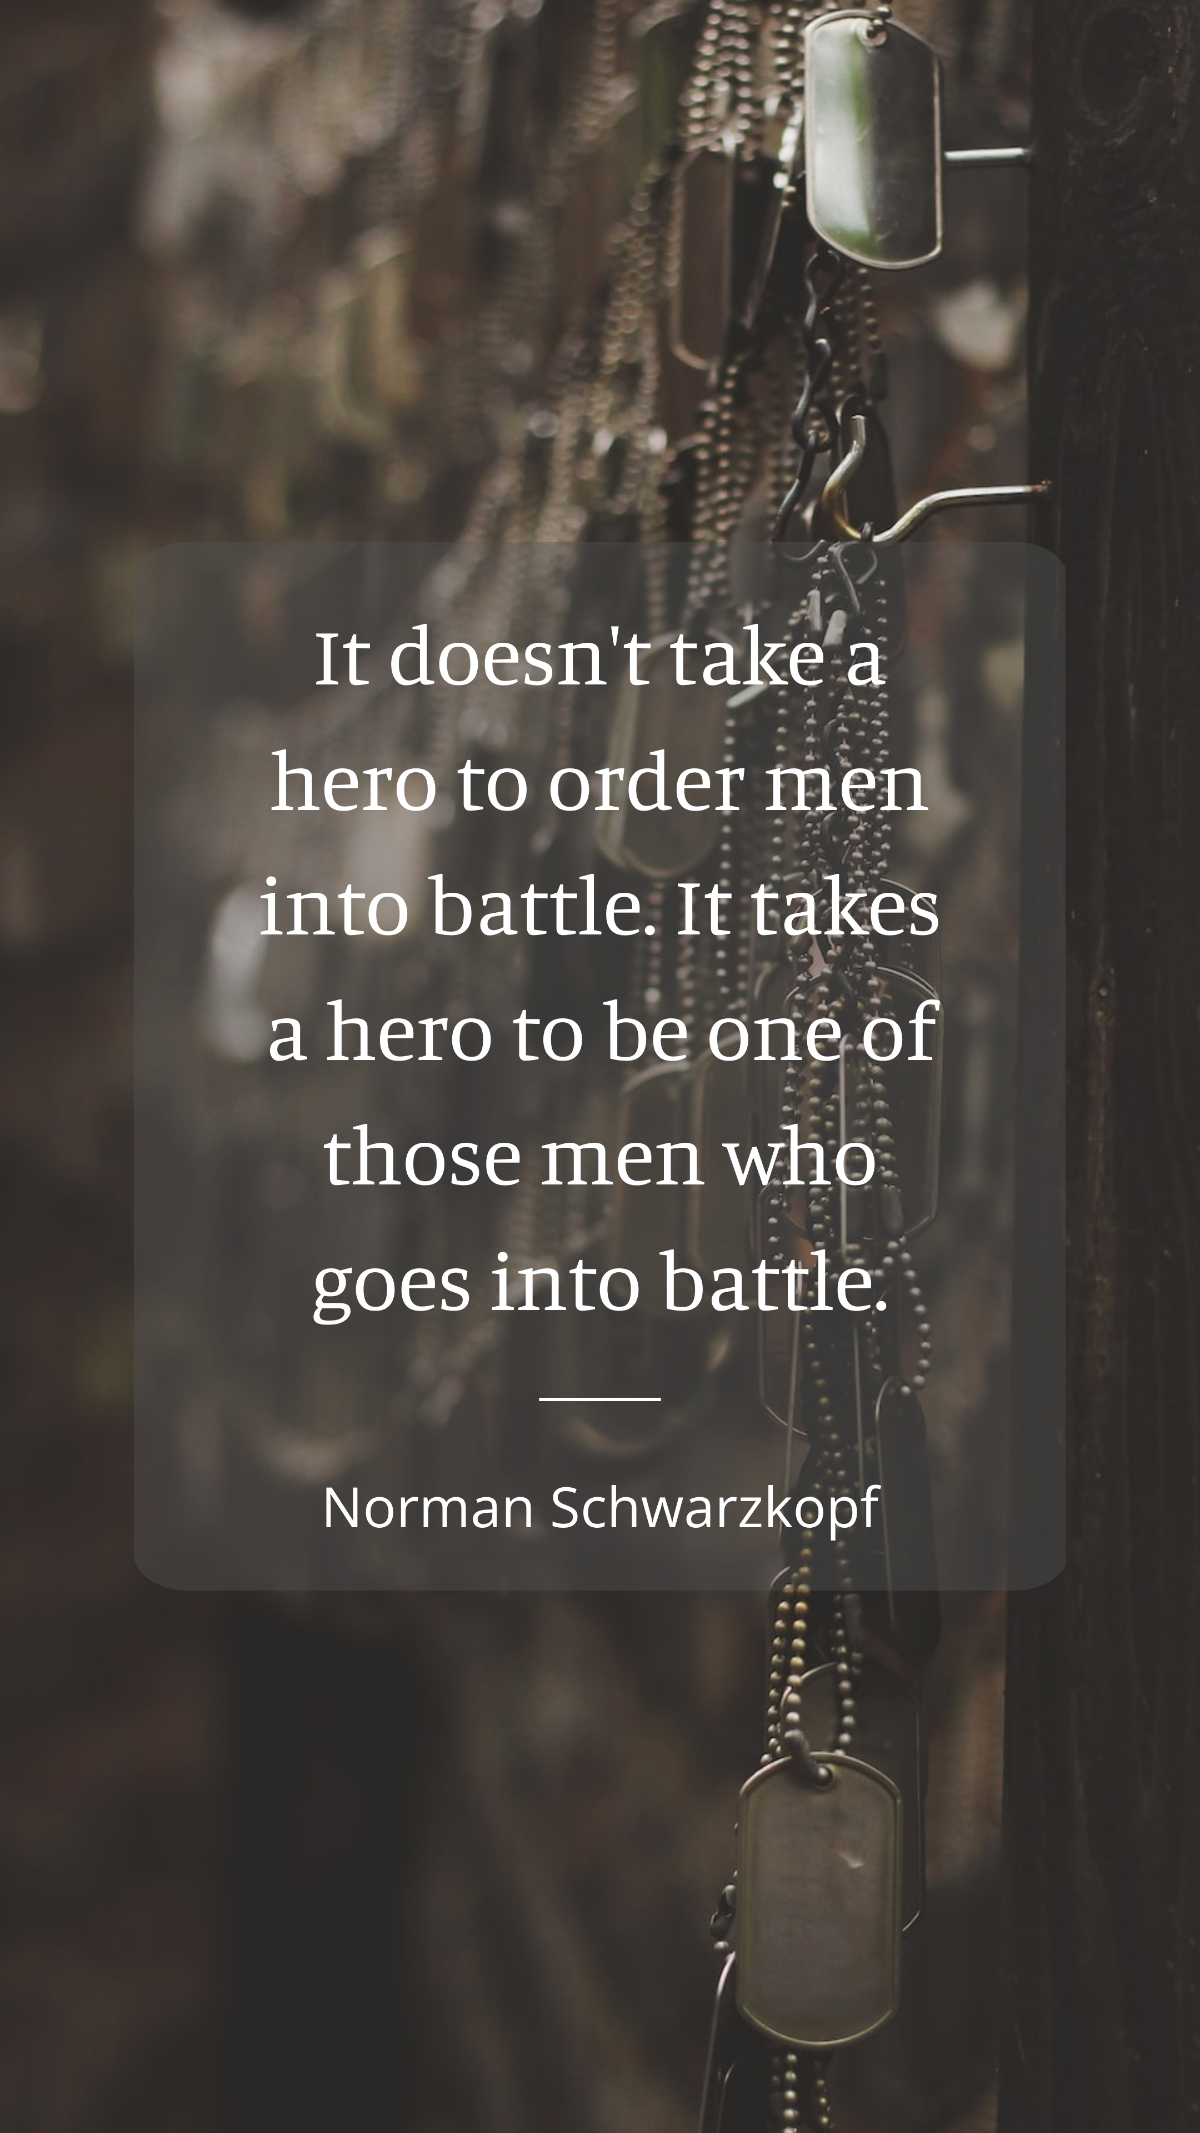 Norman Schwarzkopf - It doesn't take a hero to order men into battle. It takes a hero to be one of those men who goes into battle.